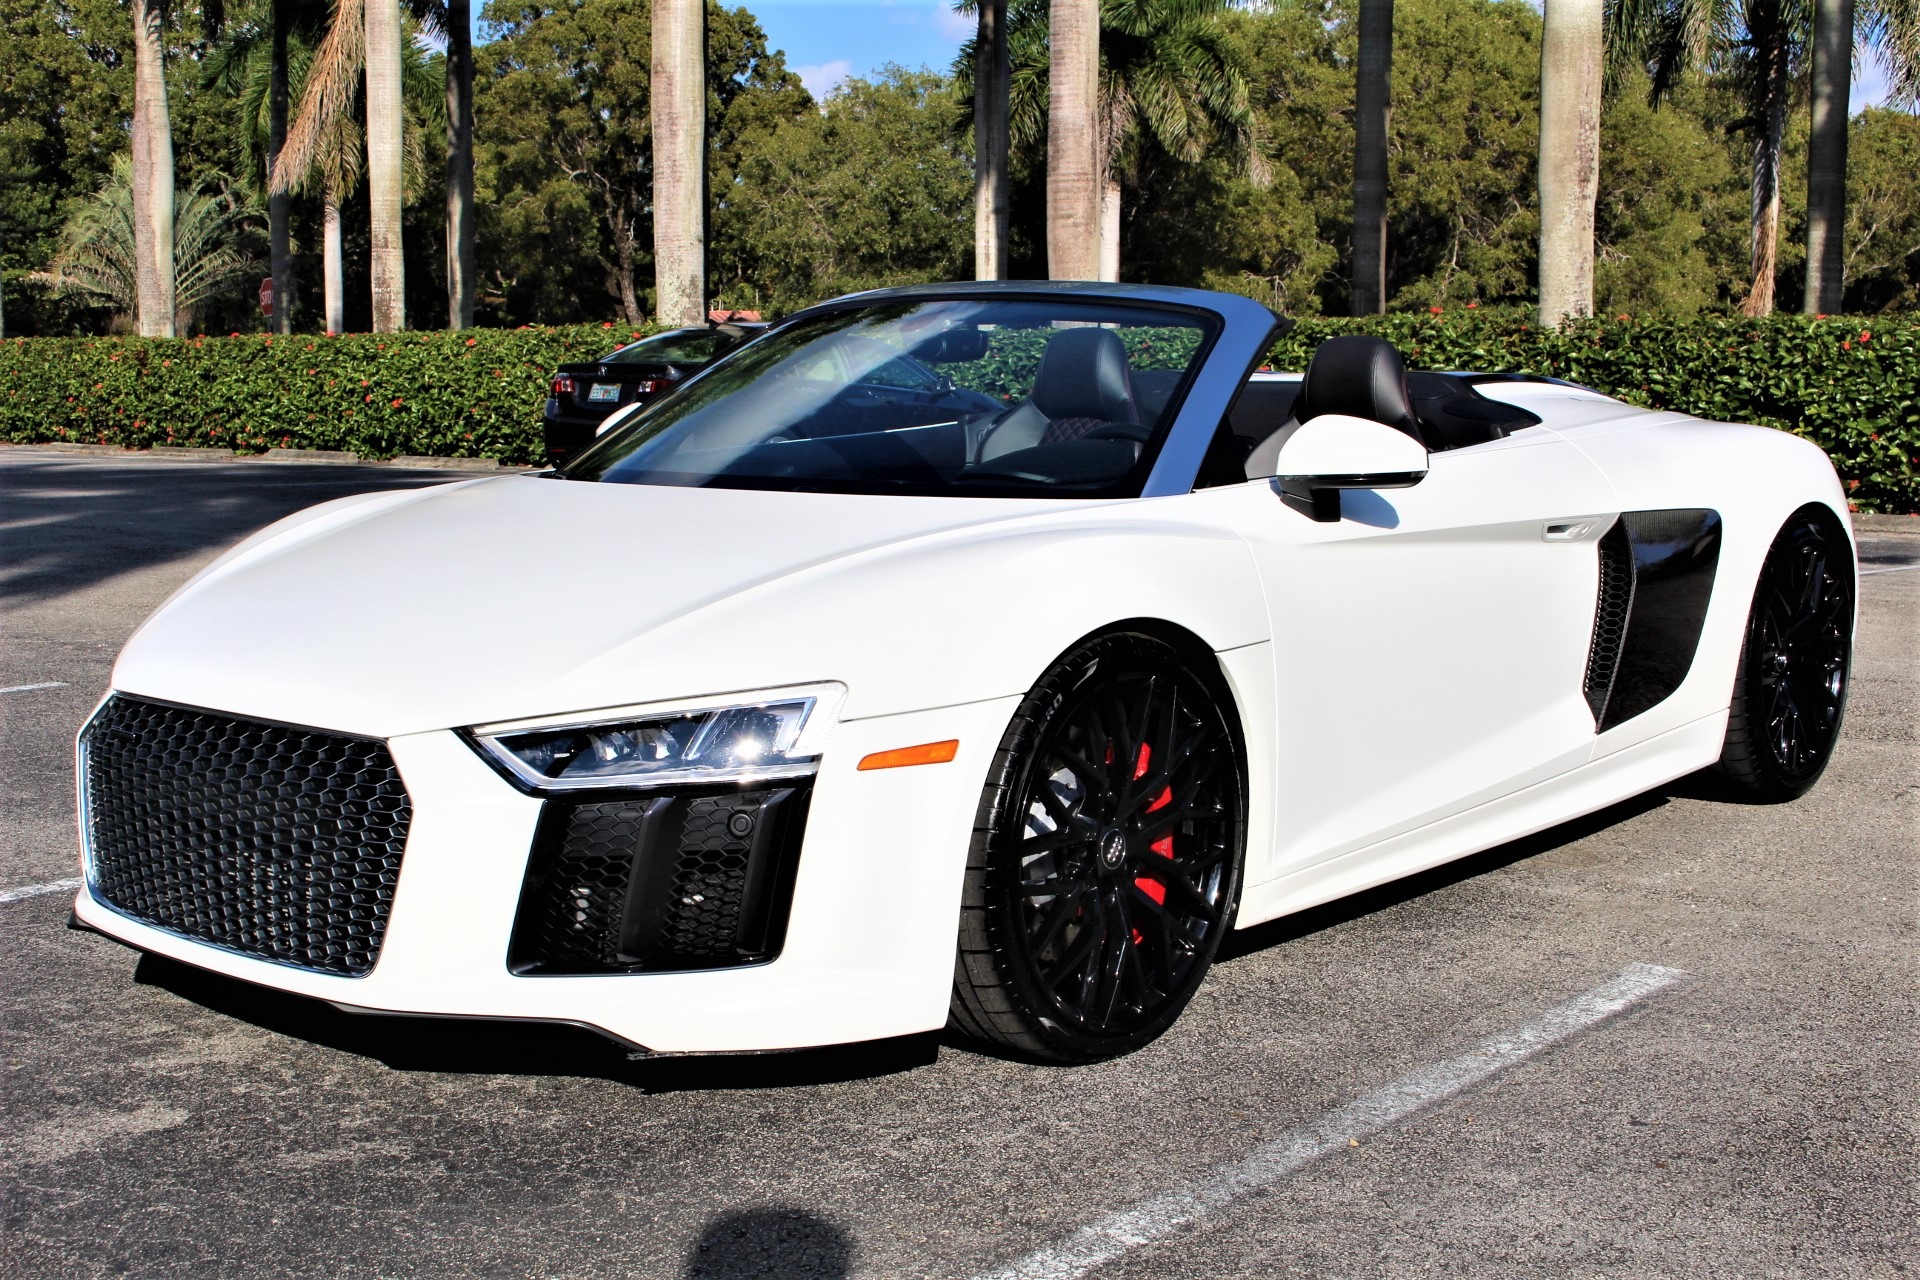 Used 2017 Audi R8 5.2 quattro V10 Spyder for sale Sold at The Gables Sports Cars in Miami FL 33146 4